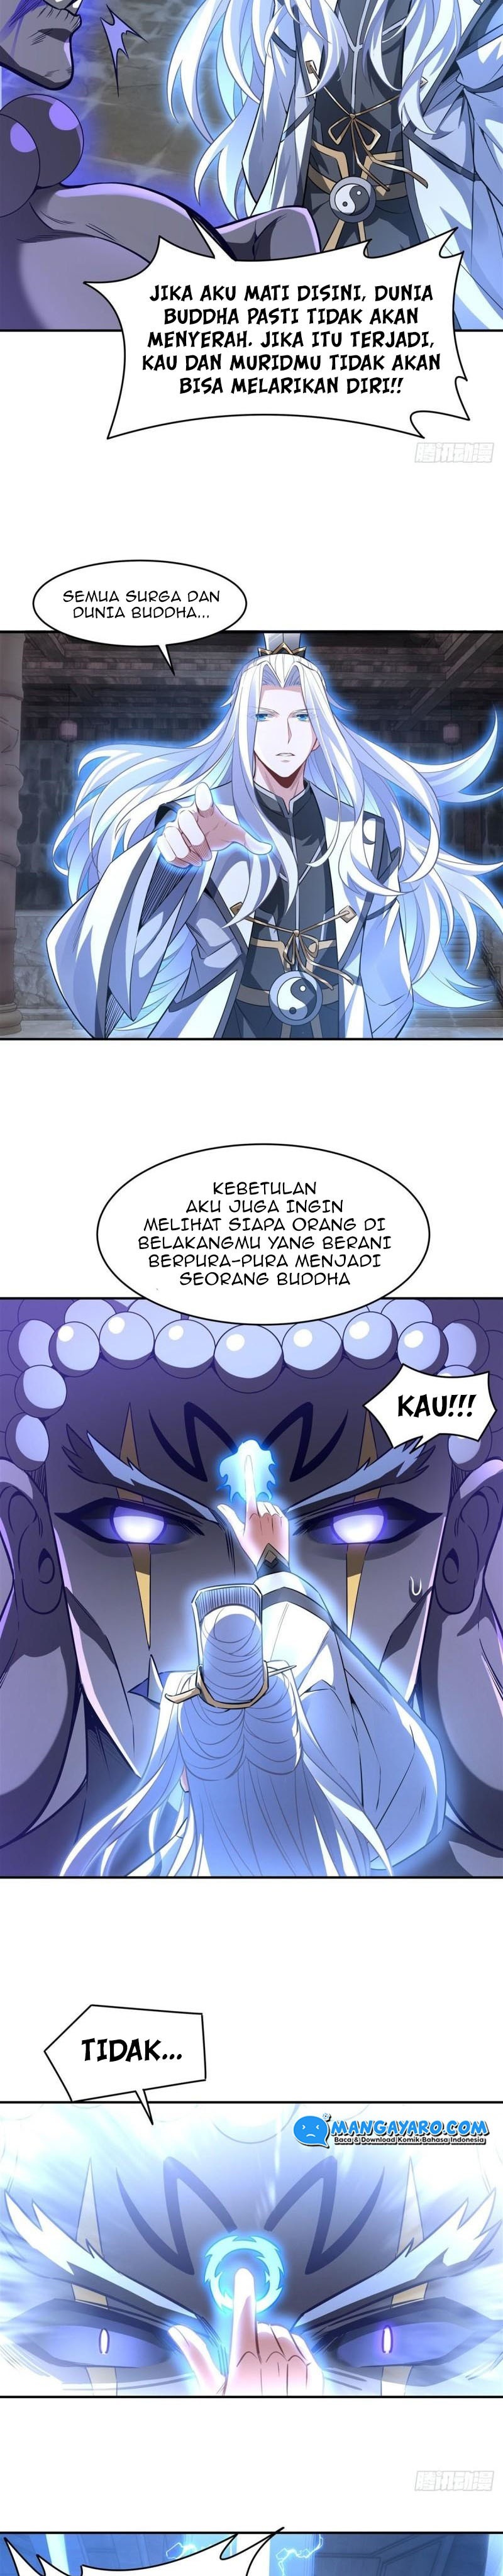 Dilarang COPAS - situs resmi www.mangacanblog.com - Komik my female apprentices are all big shots from the future 069 - chapter 69 70 Indonesia my female apprentices are all big shots from the future 069 - chapter 69 Terbaru 5|Baca Manga Komik Indonesia|Mangacan